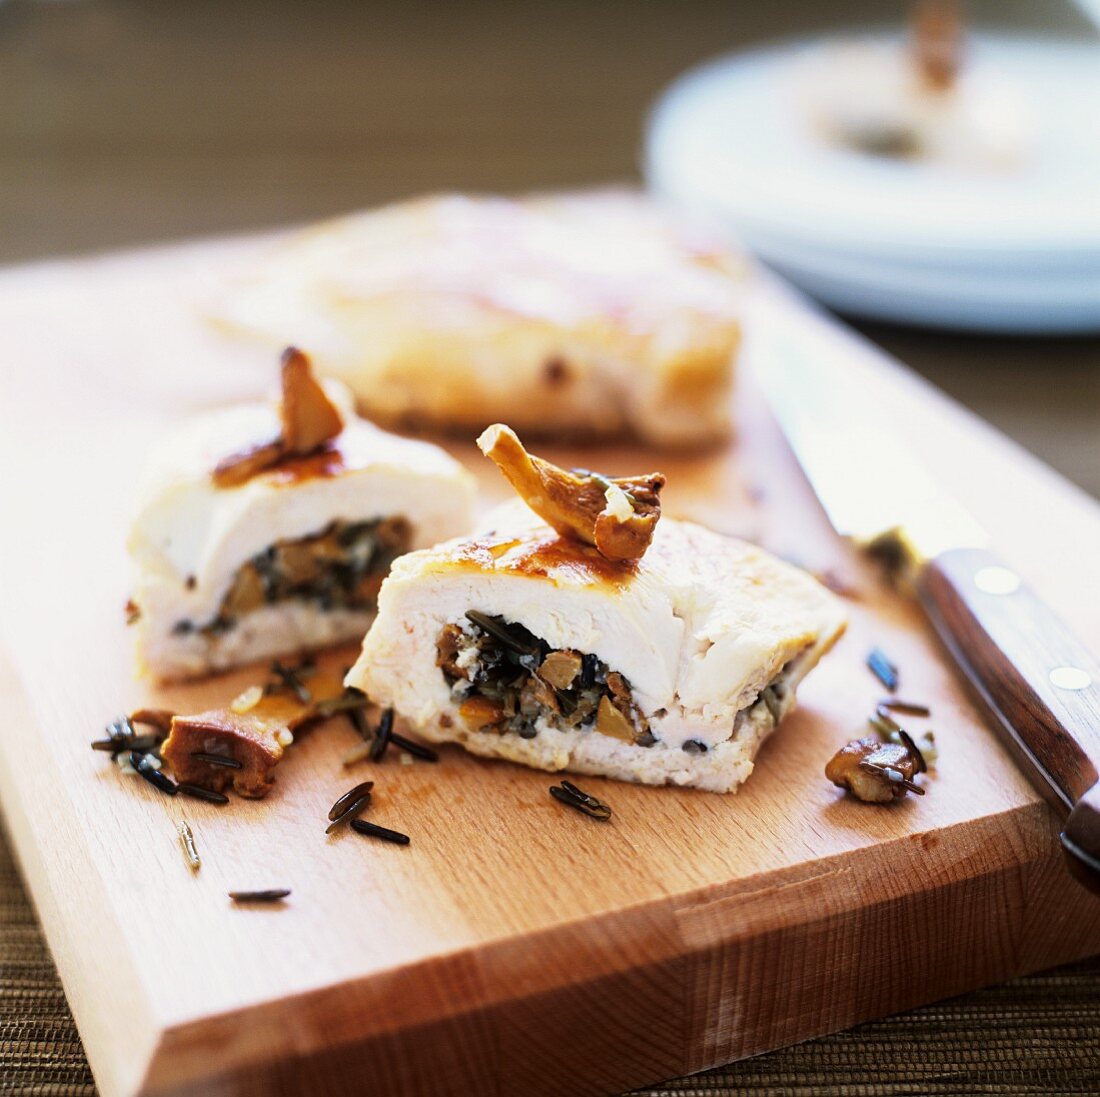 Chicken breast stuffed with wild rice and mushrooms (Canada)